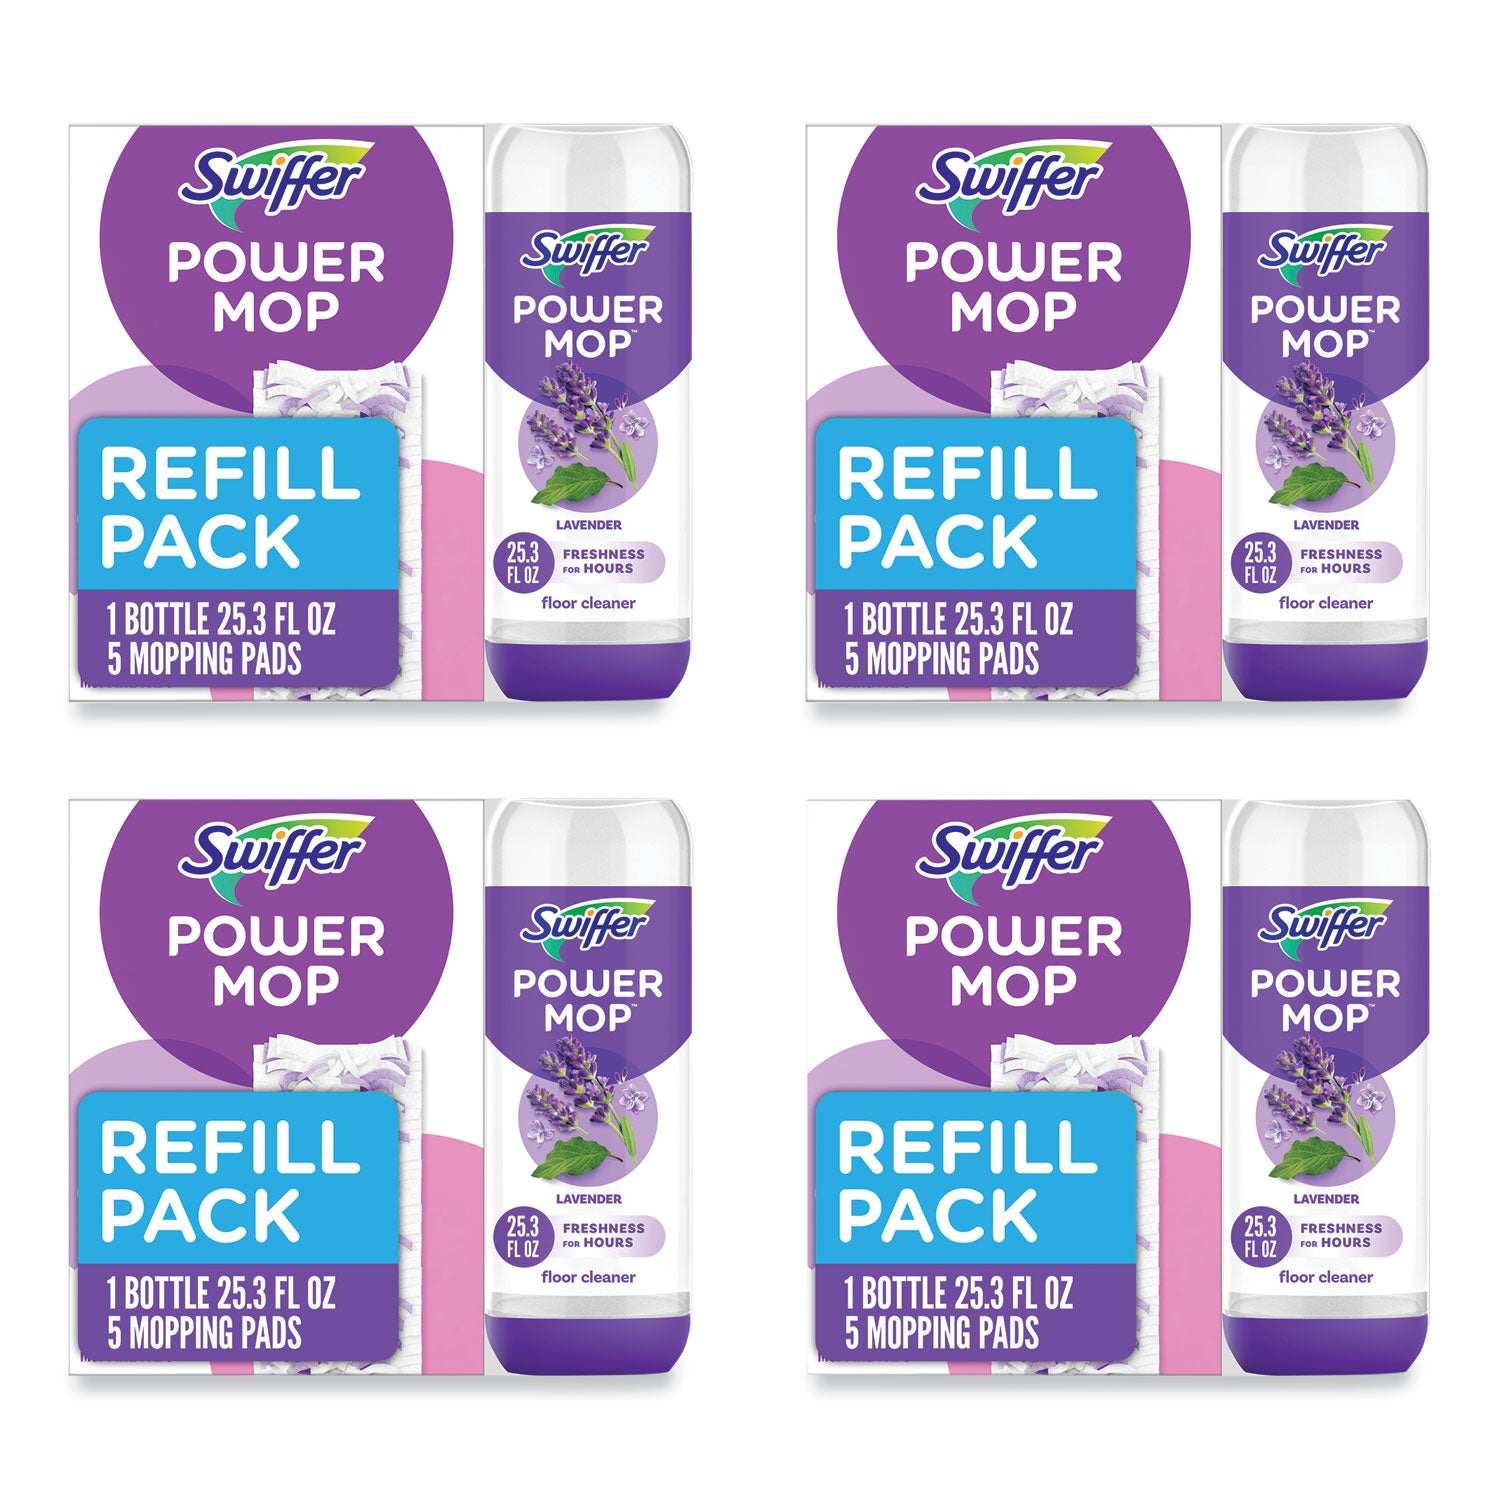 powermop-cleaning-solution-and-pads-refill-pack-lavender-253-oz-bottle-and-5-pads-per-pack-4-packs-carton_pgc09117 - 1